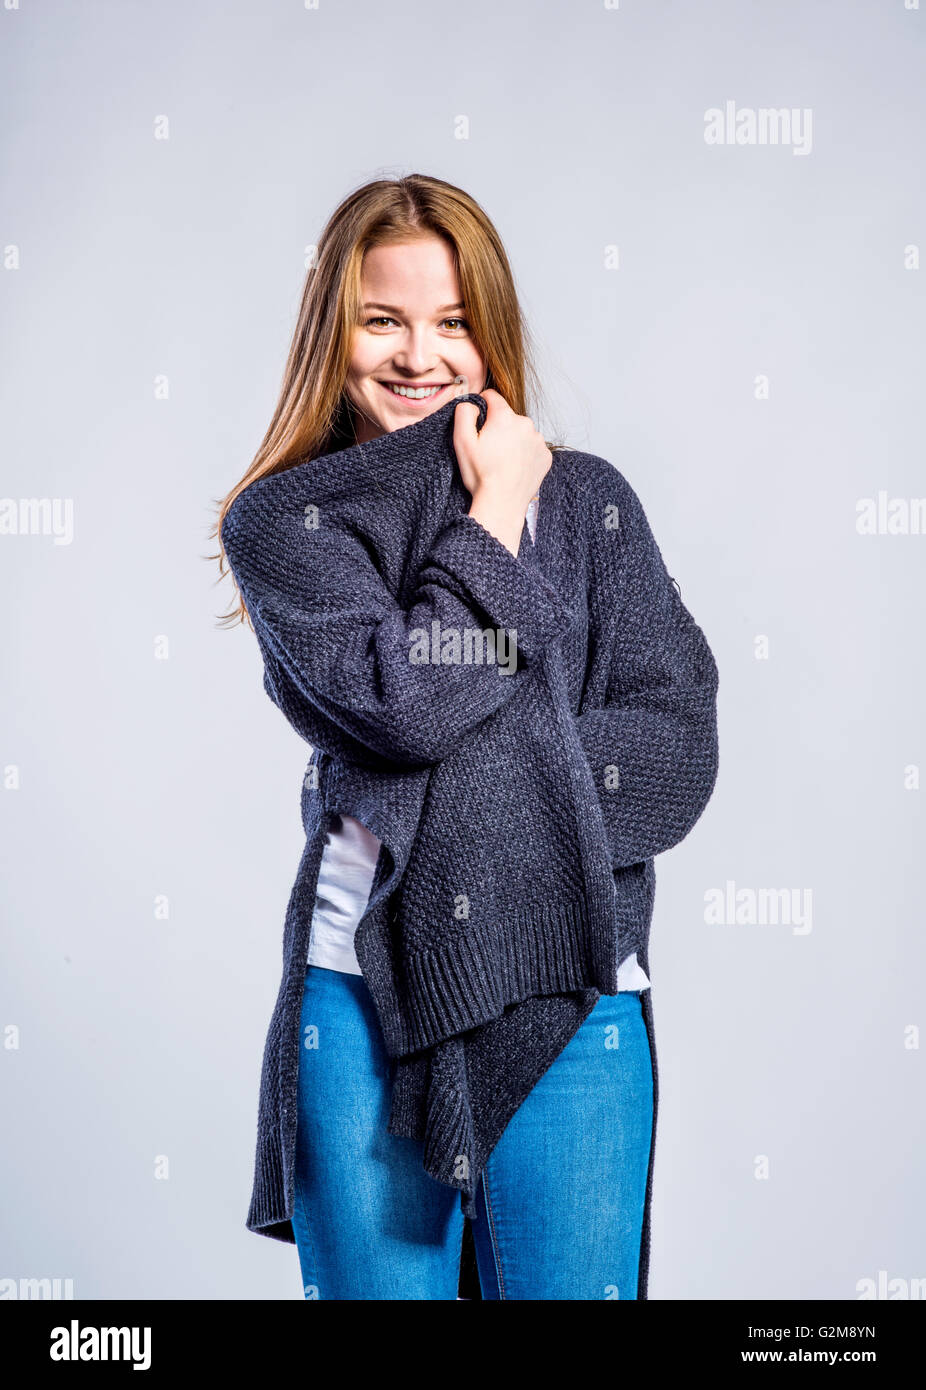 Teenage girl in jeans and long gray sweater, young woman, studio shot on gray background Stock Photo